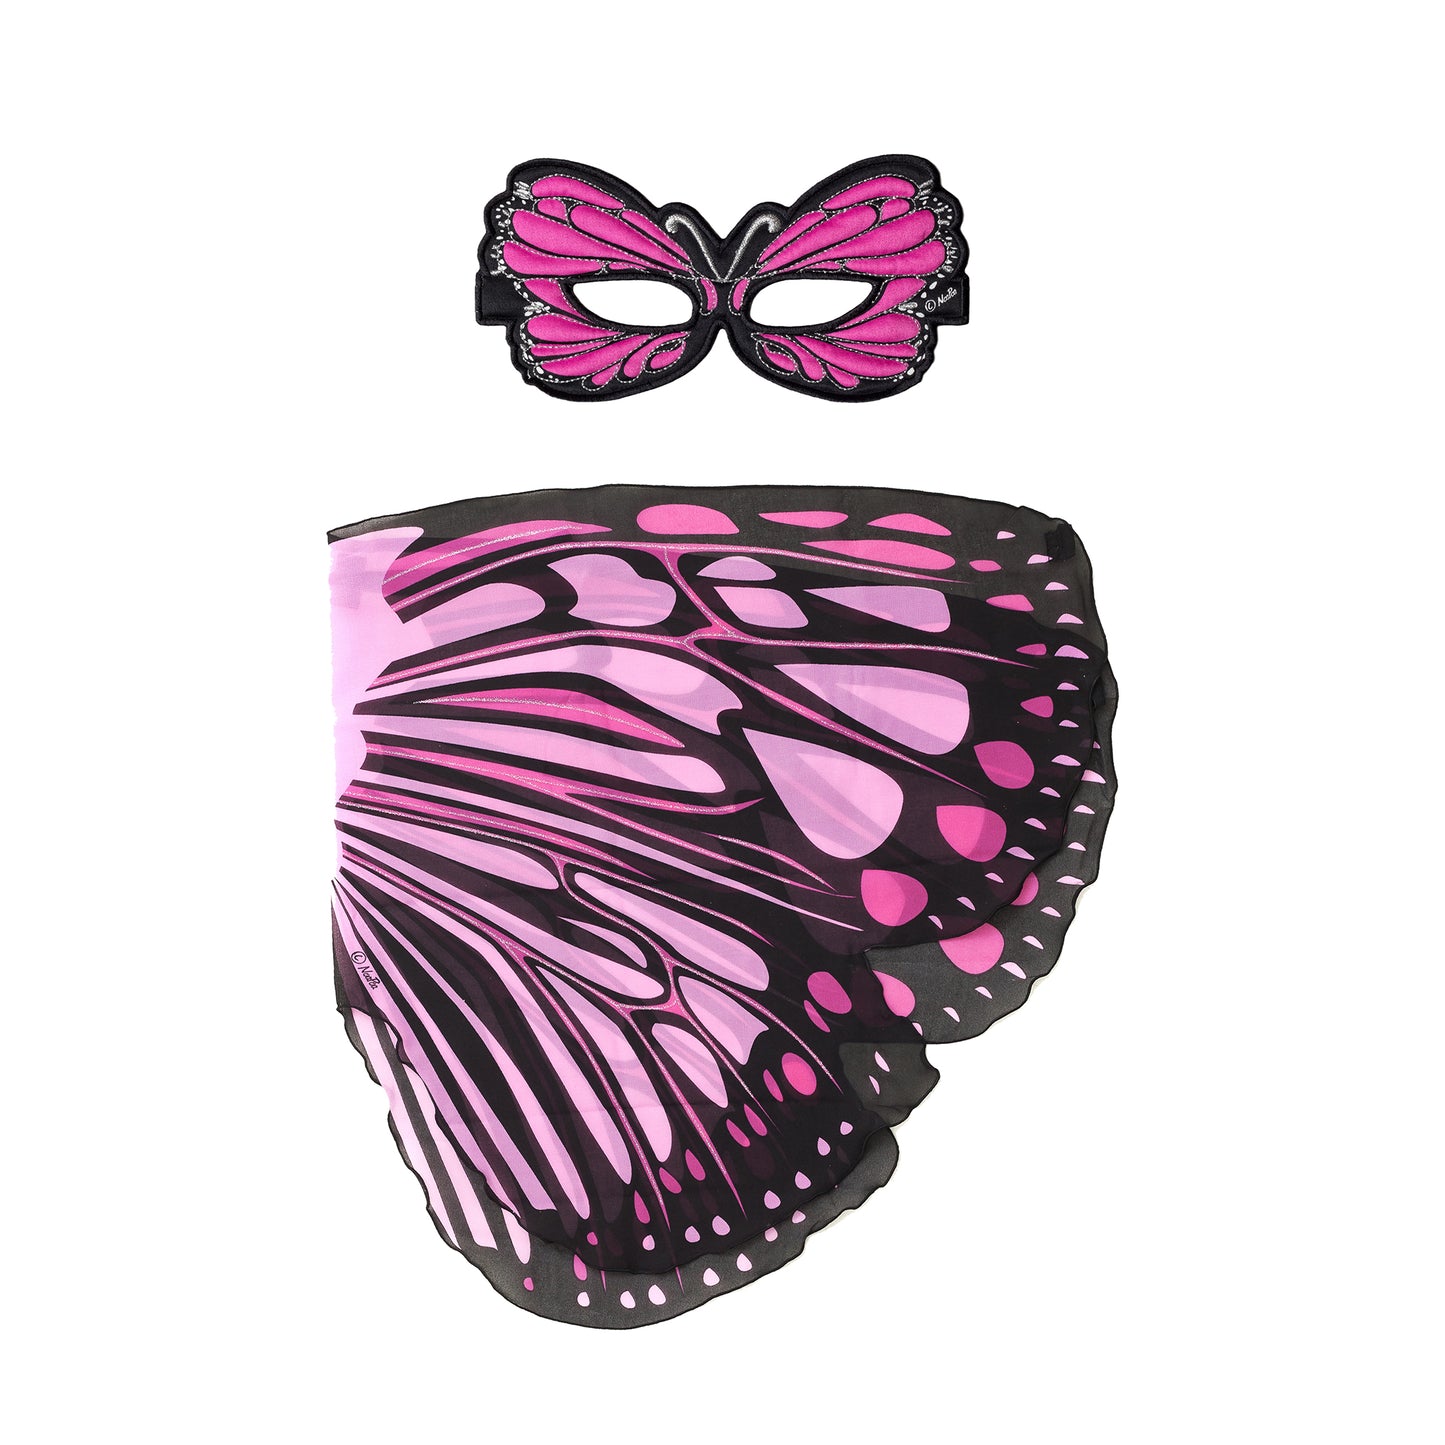 BUTTERFLY BURST WINGS + MASK in eco-friendly cotton gift bag